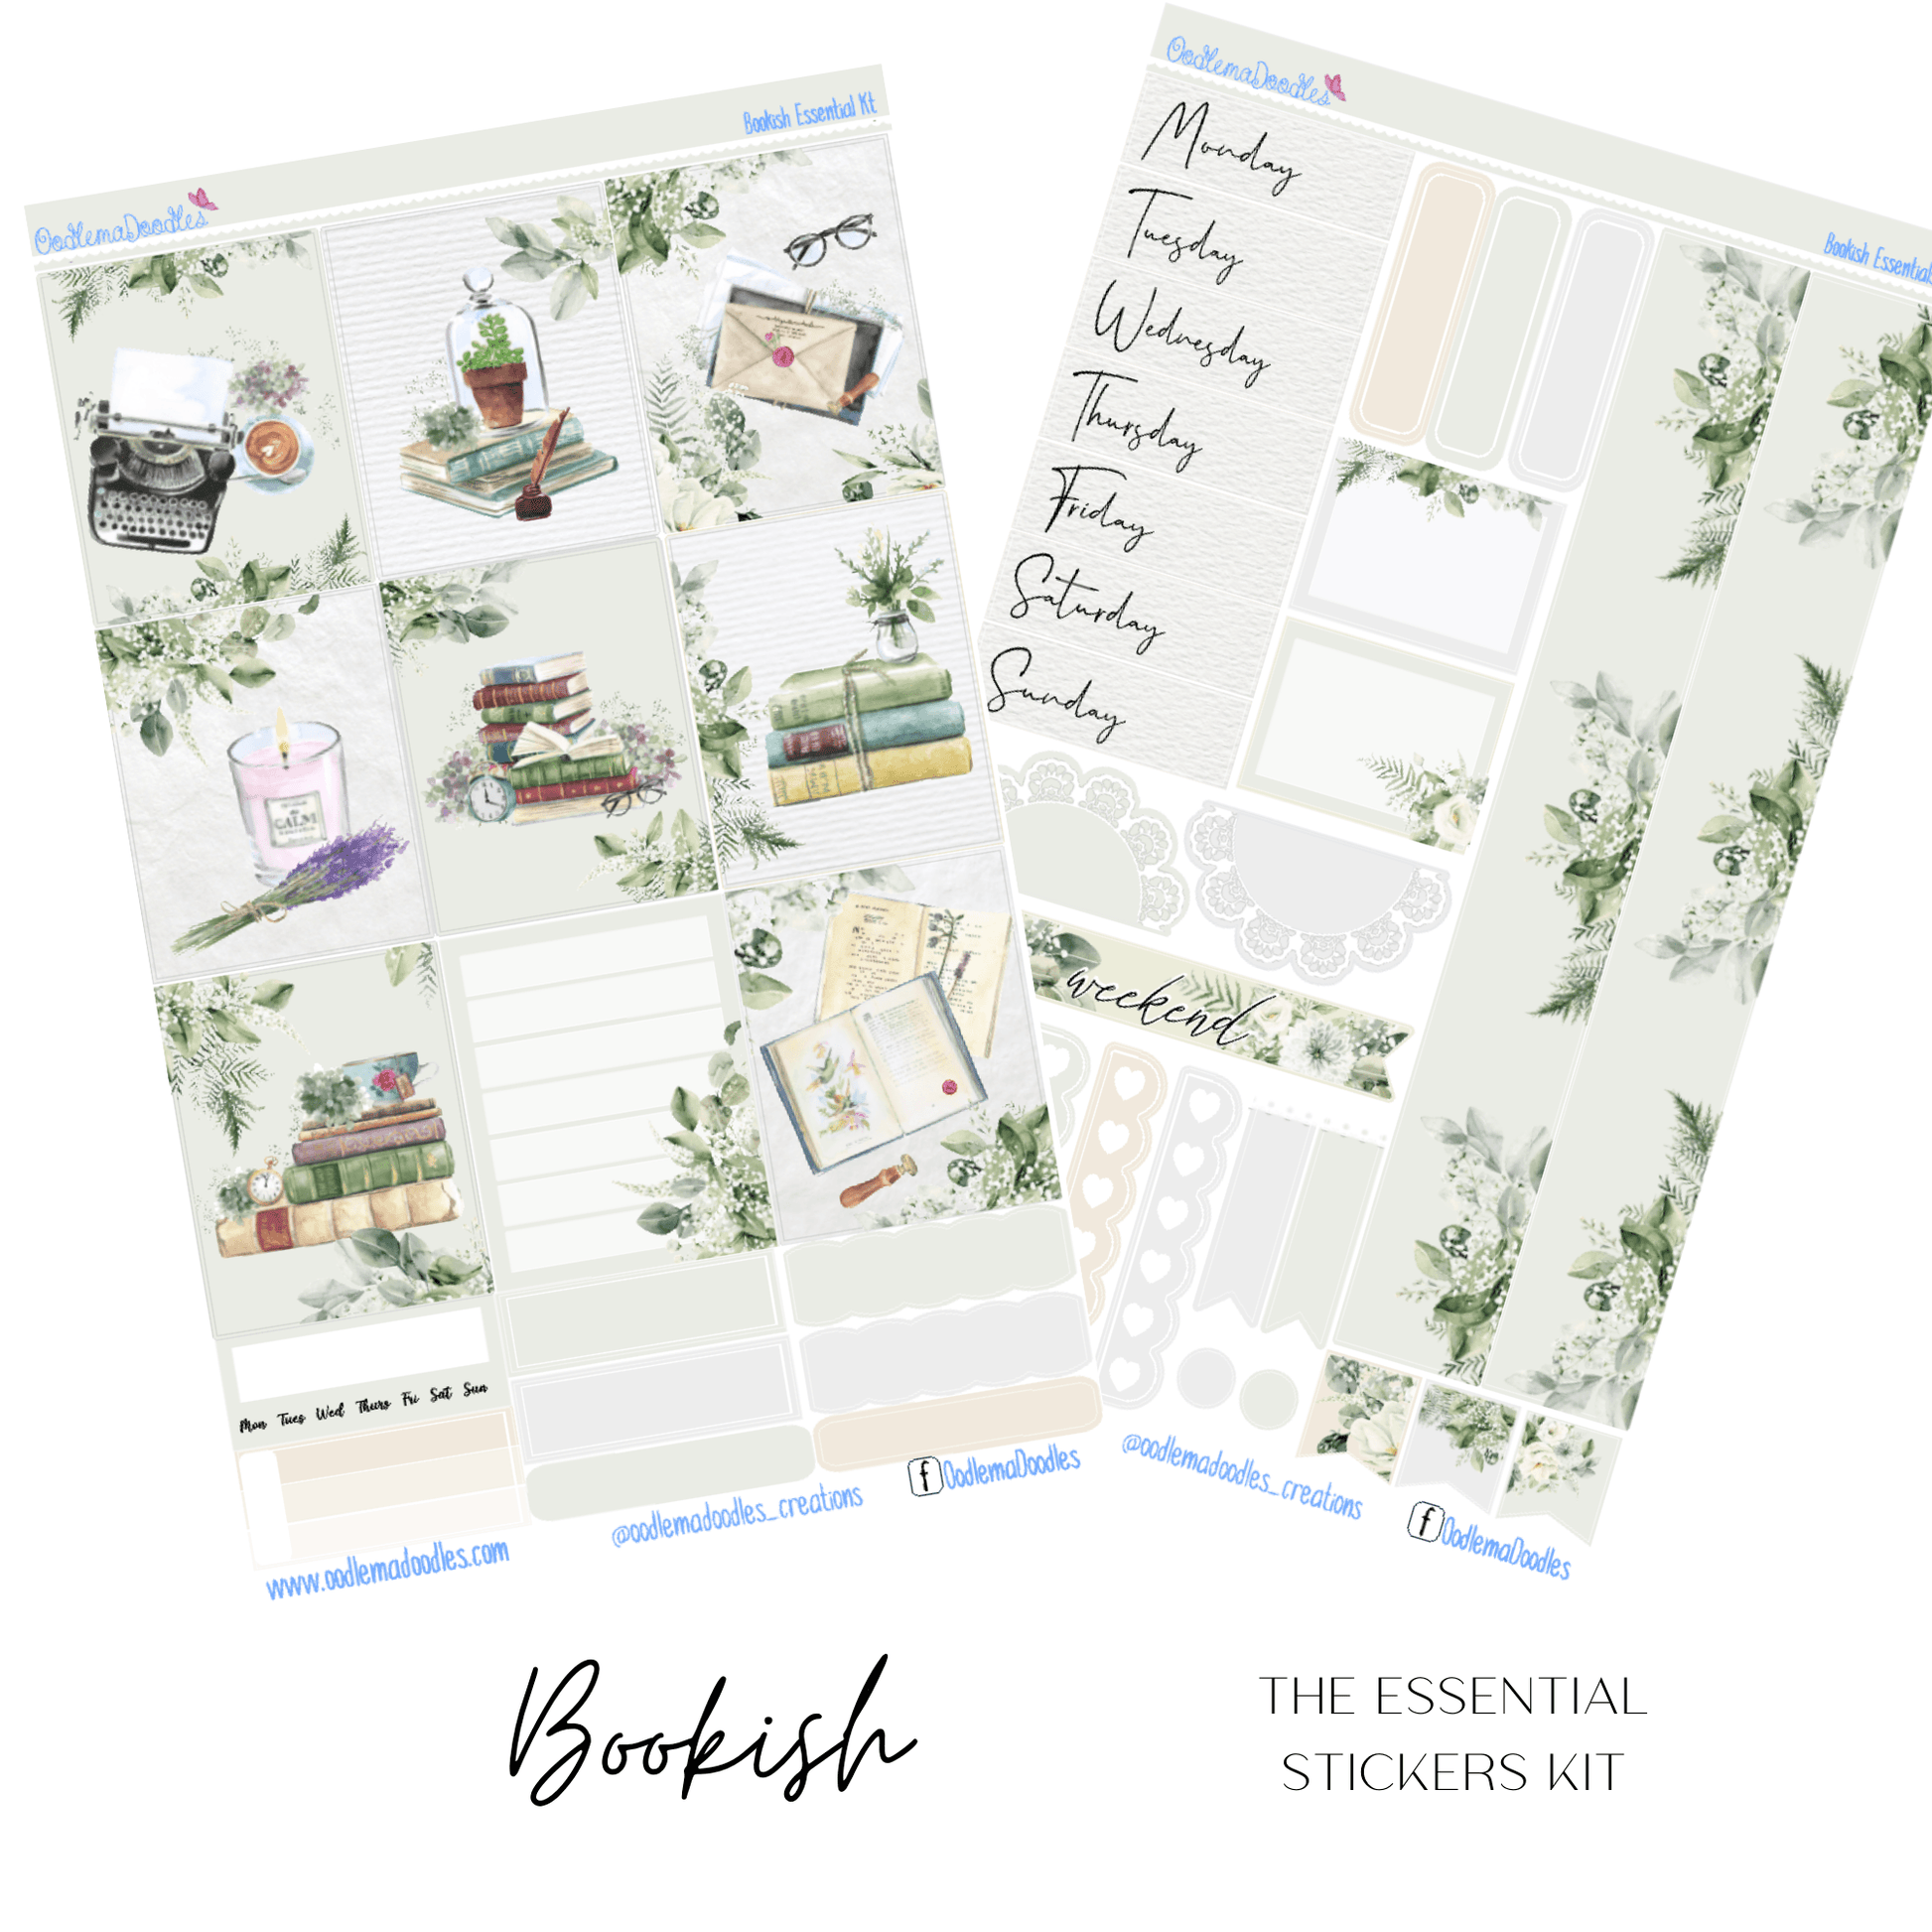 Bookish Essential Planner Sticker Kit - oodlemadoodles